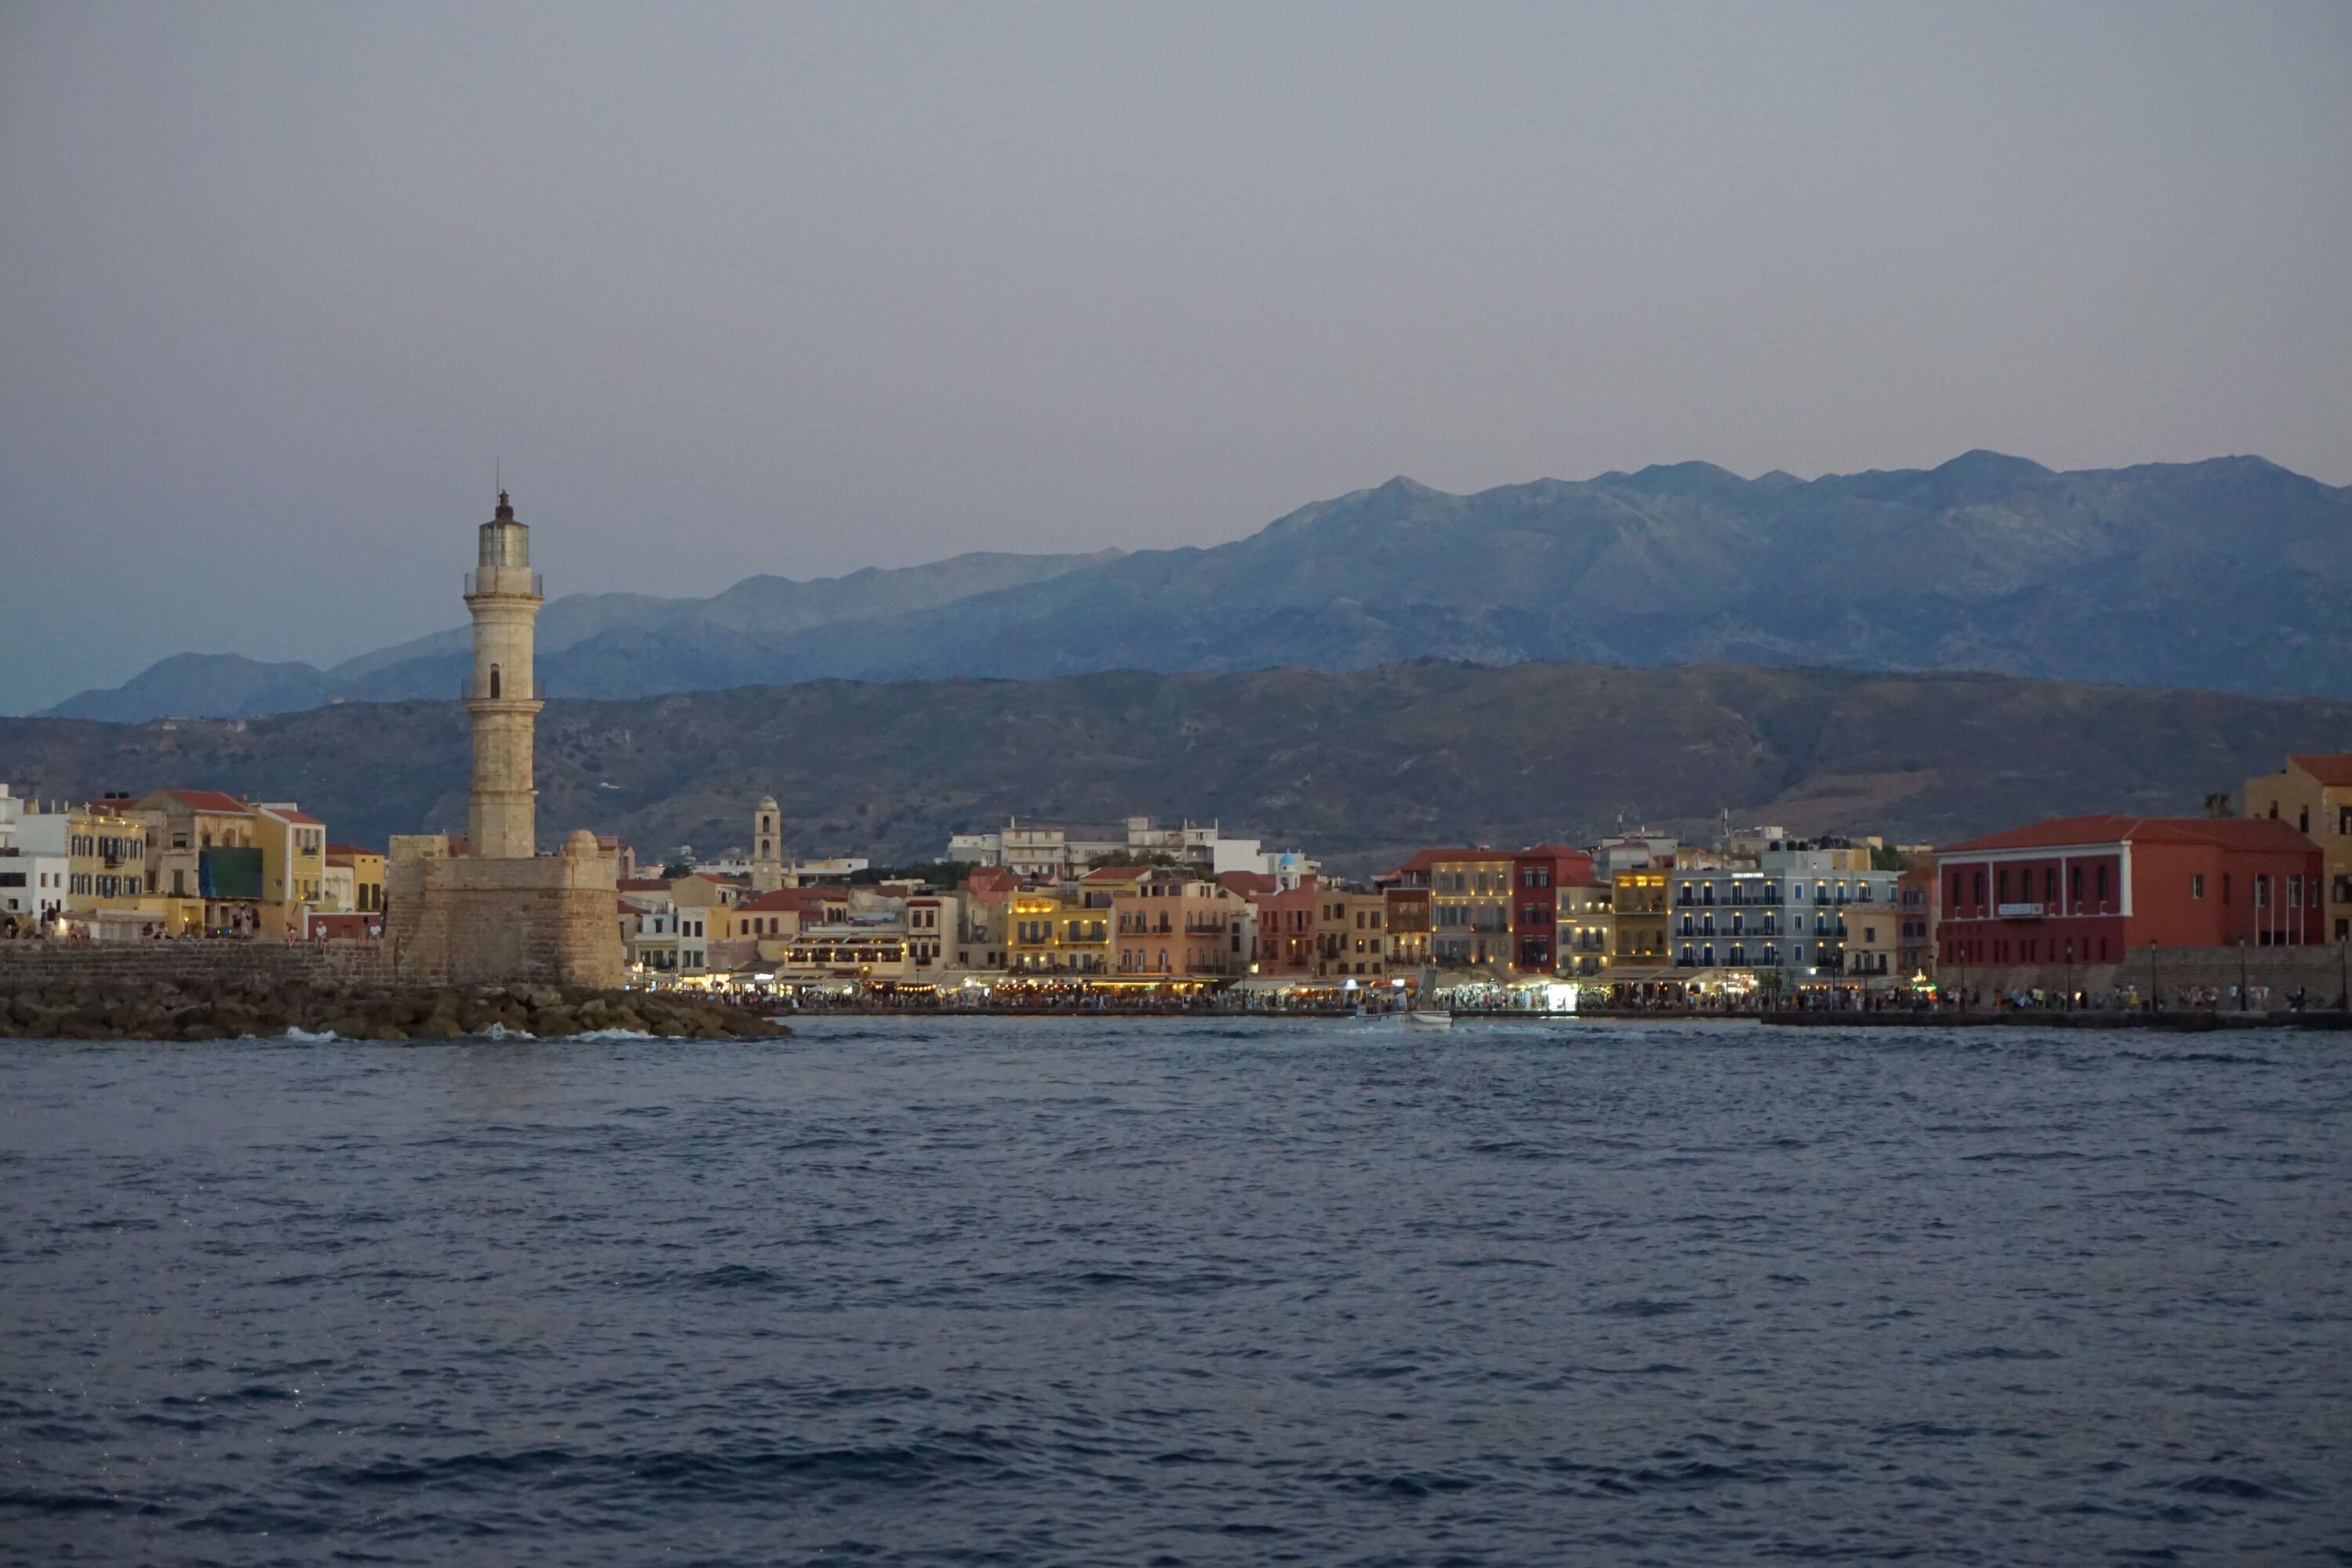 Chania Old Venetian Harbour at Sunset